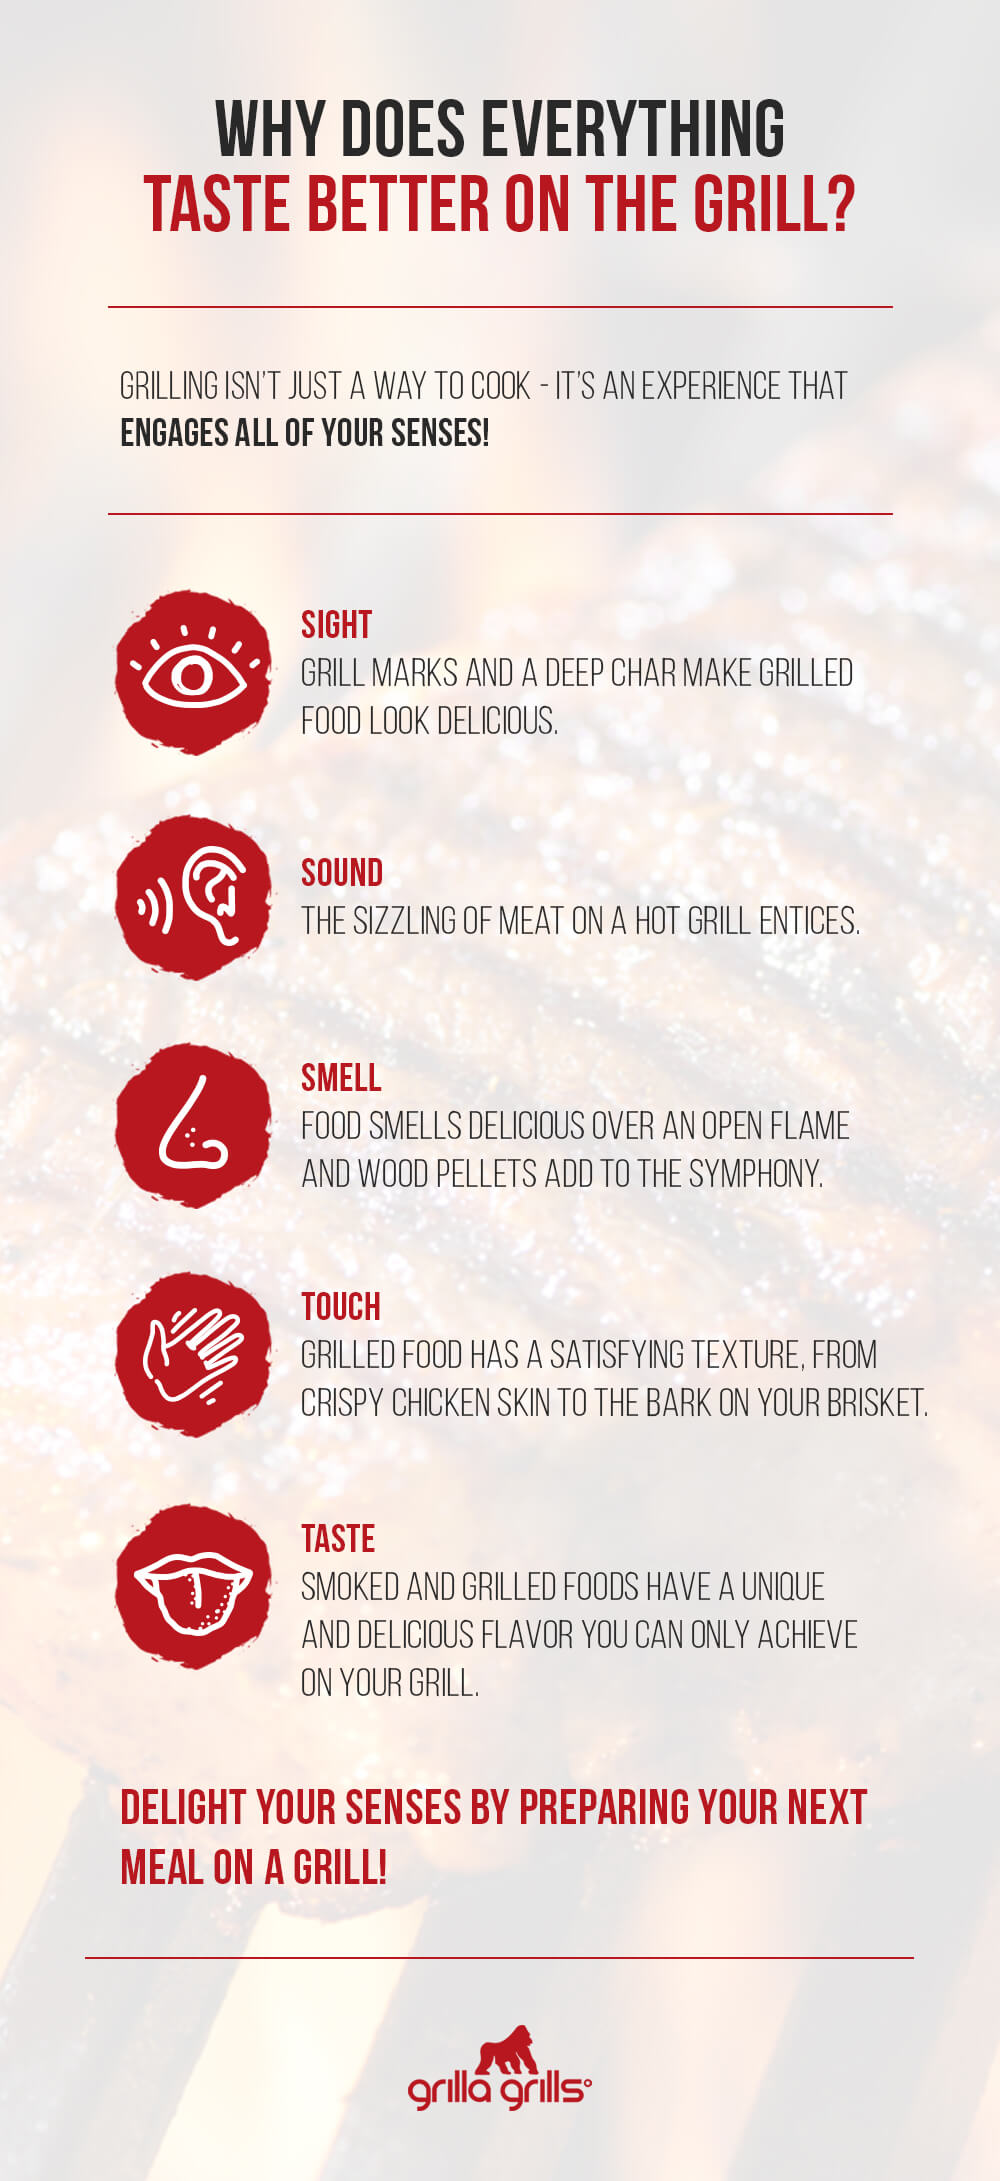 science of grilling - why does everything taste better on the grill